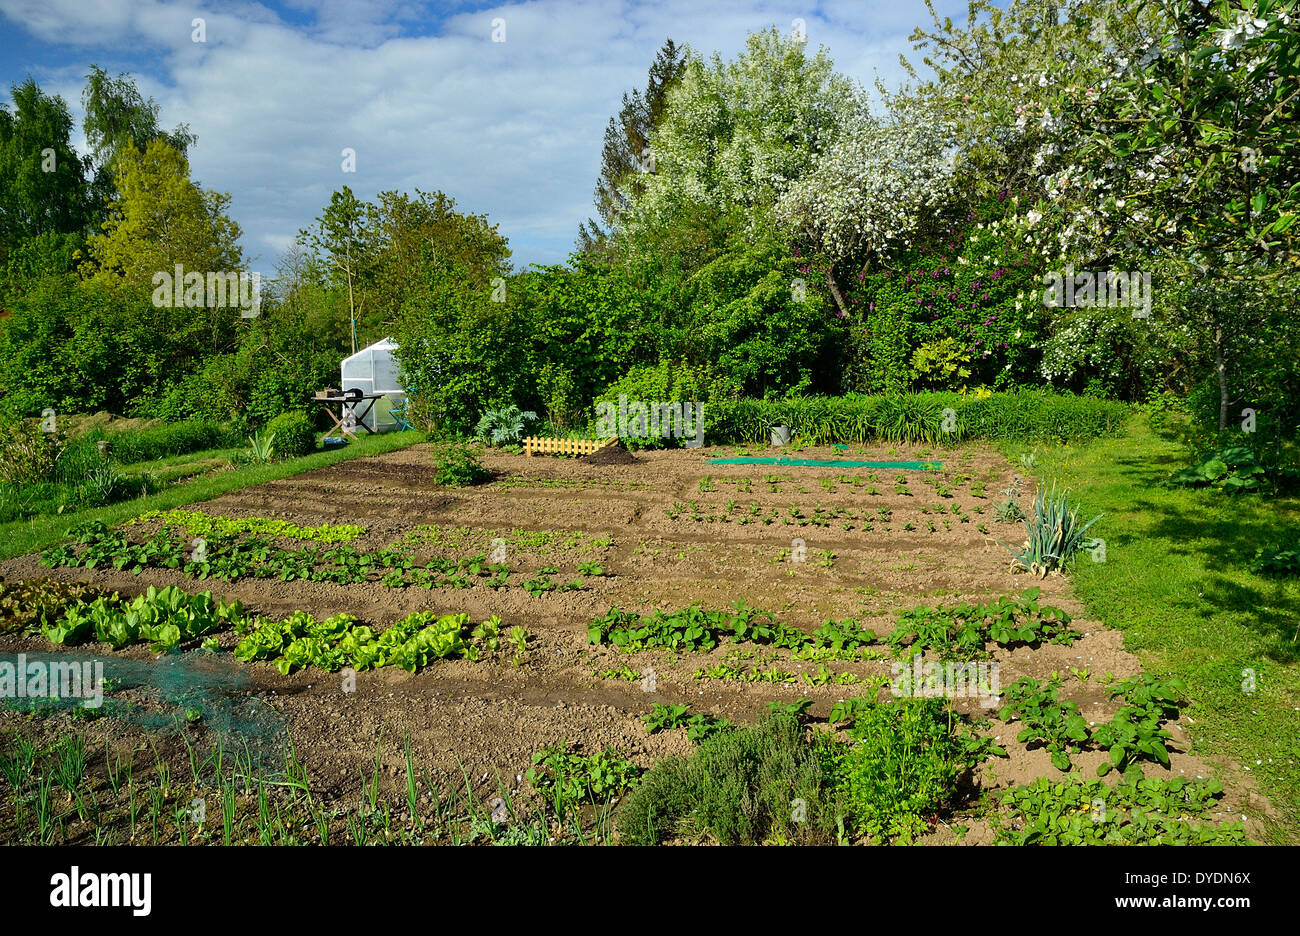 Vegetable garden in spring, vegetable beds, small greenhouse, hedge shrubs, fruit trees. Stock Photo